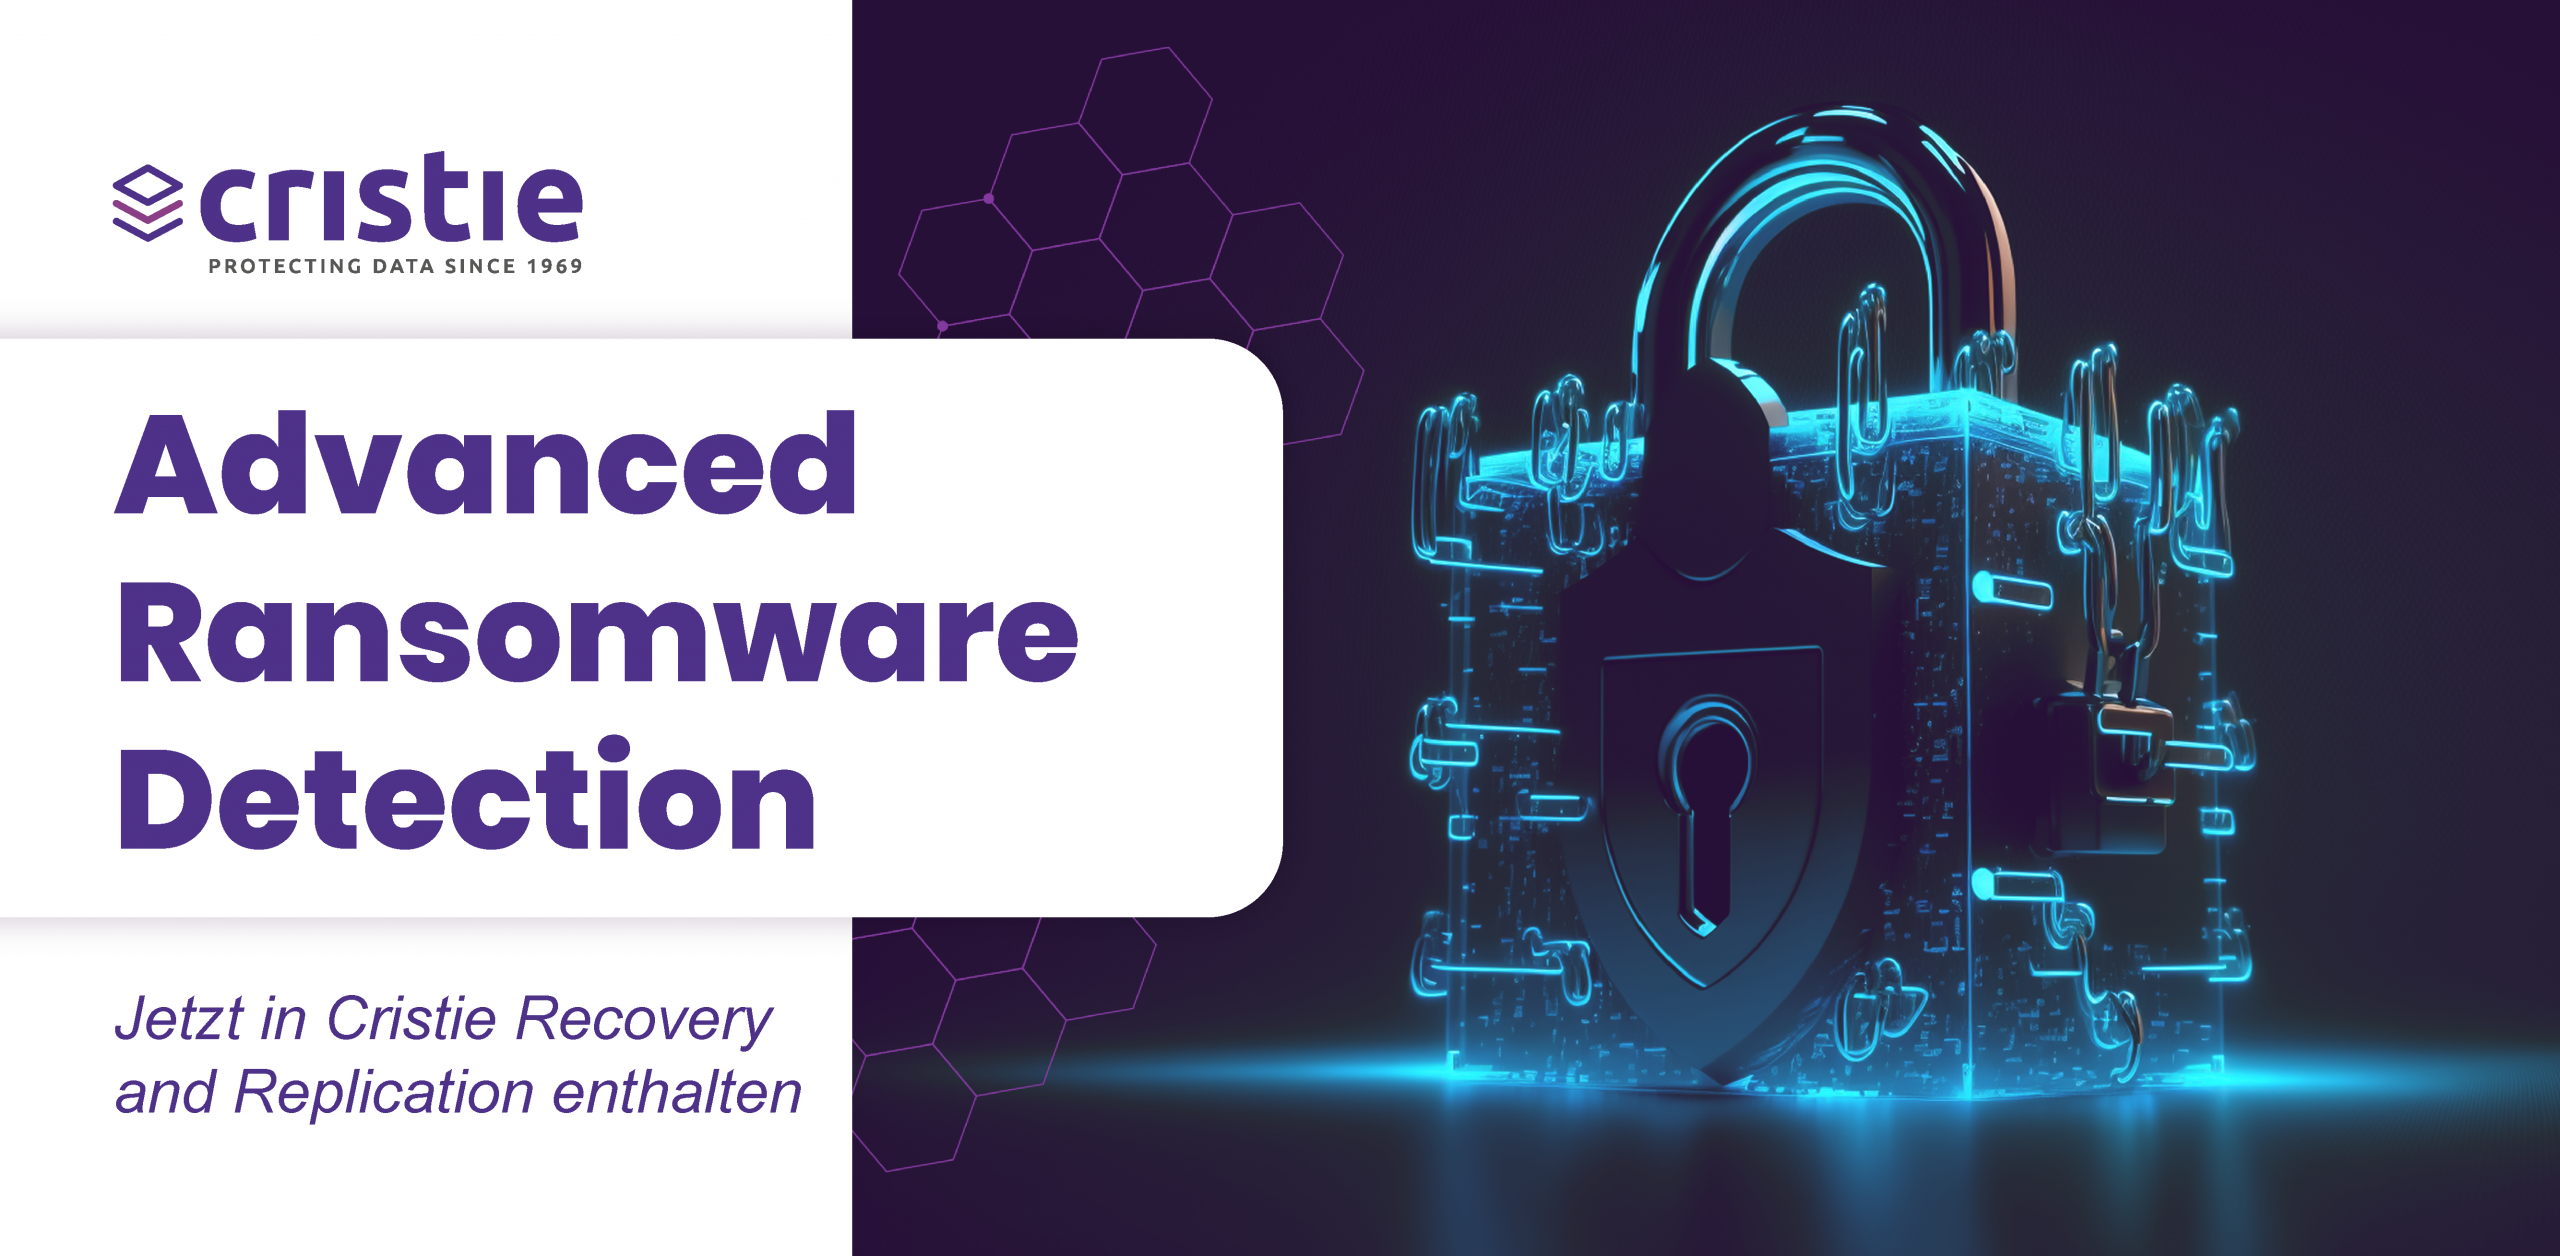 Ransomware detection and enhanced recovery now included in the Cristie Software recovery and replication portfolio